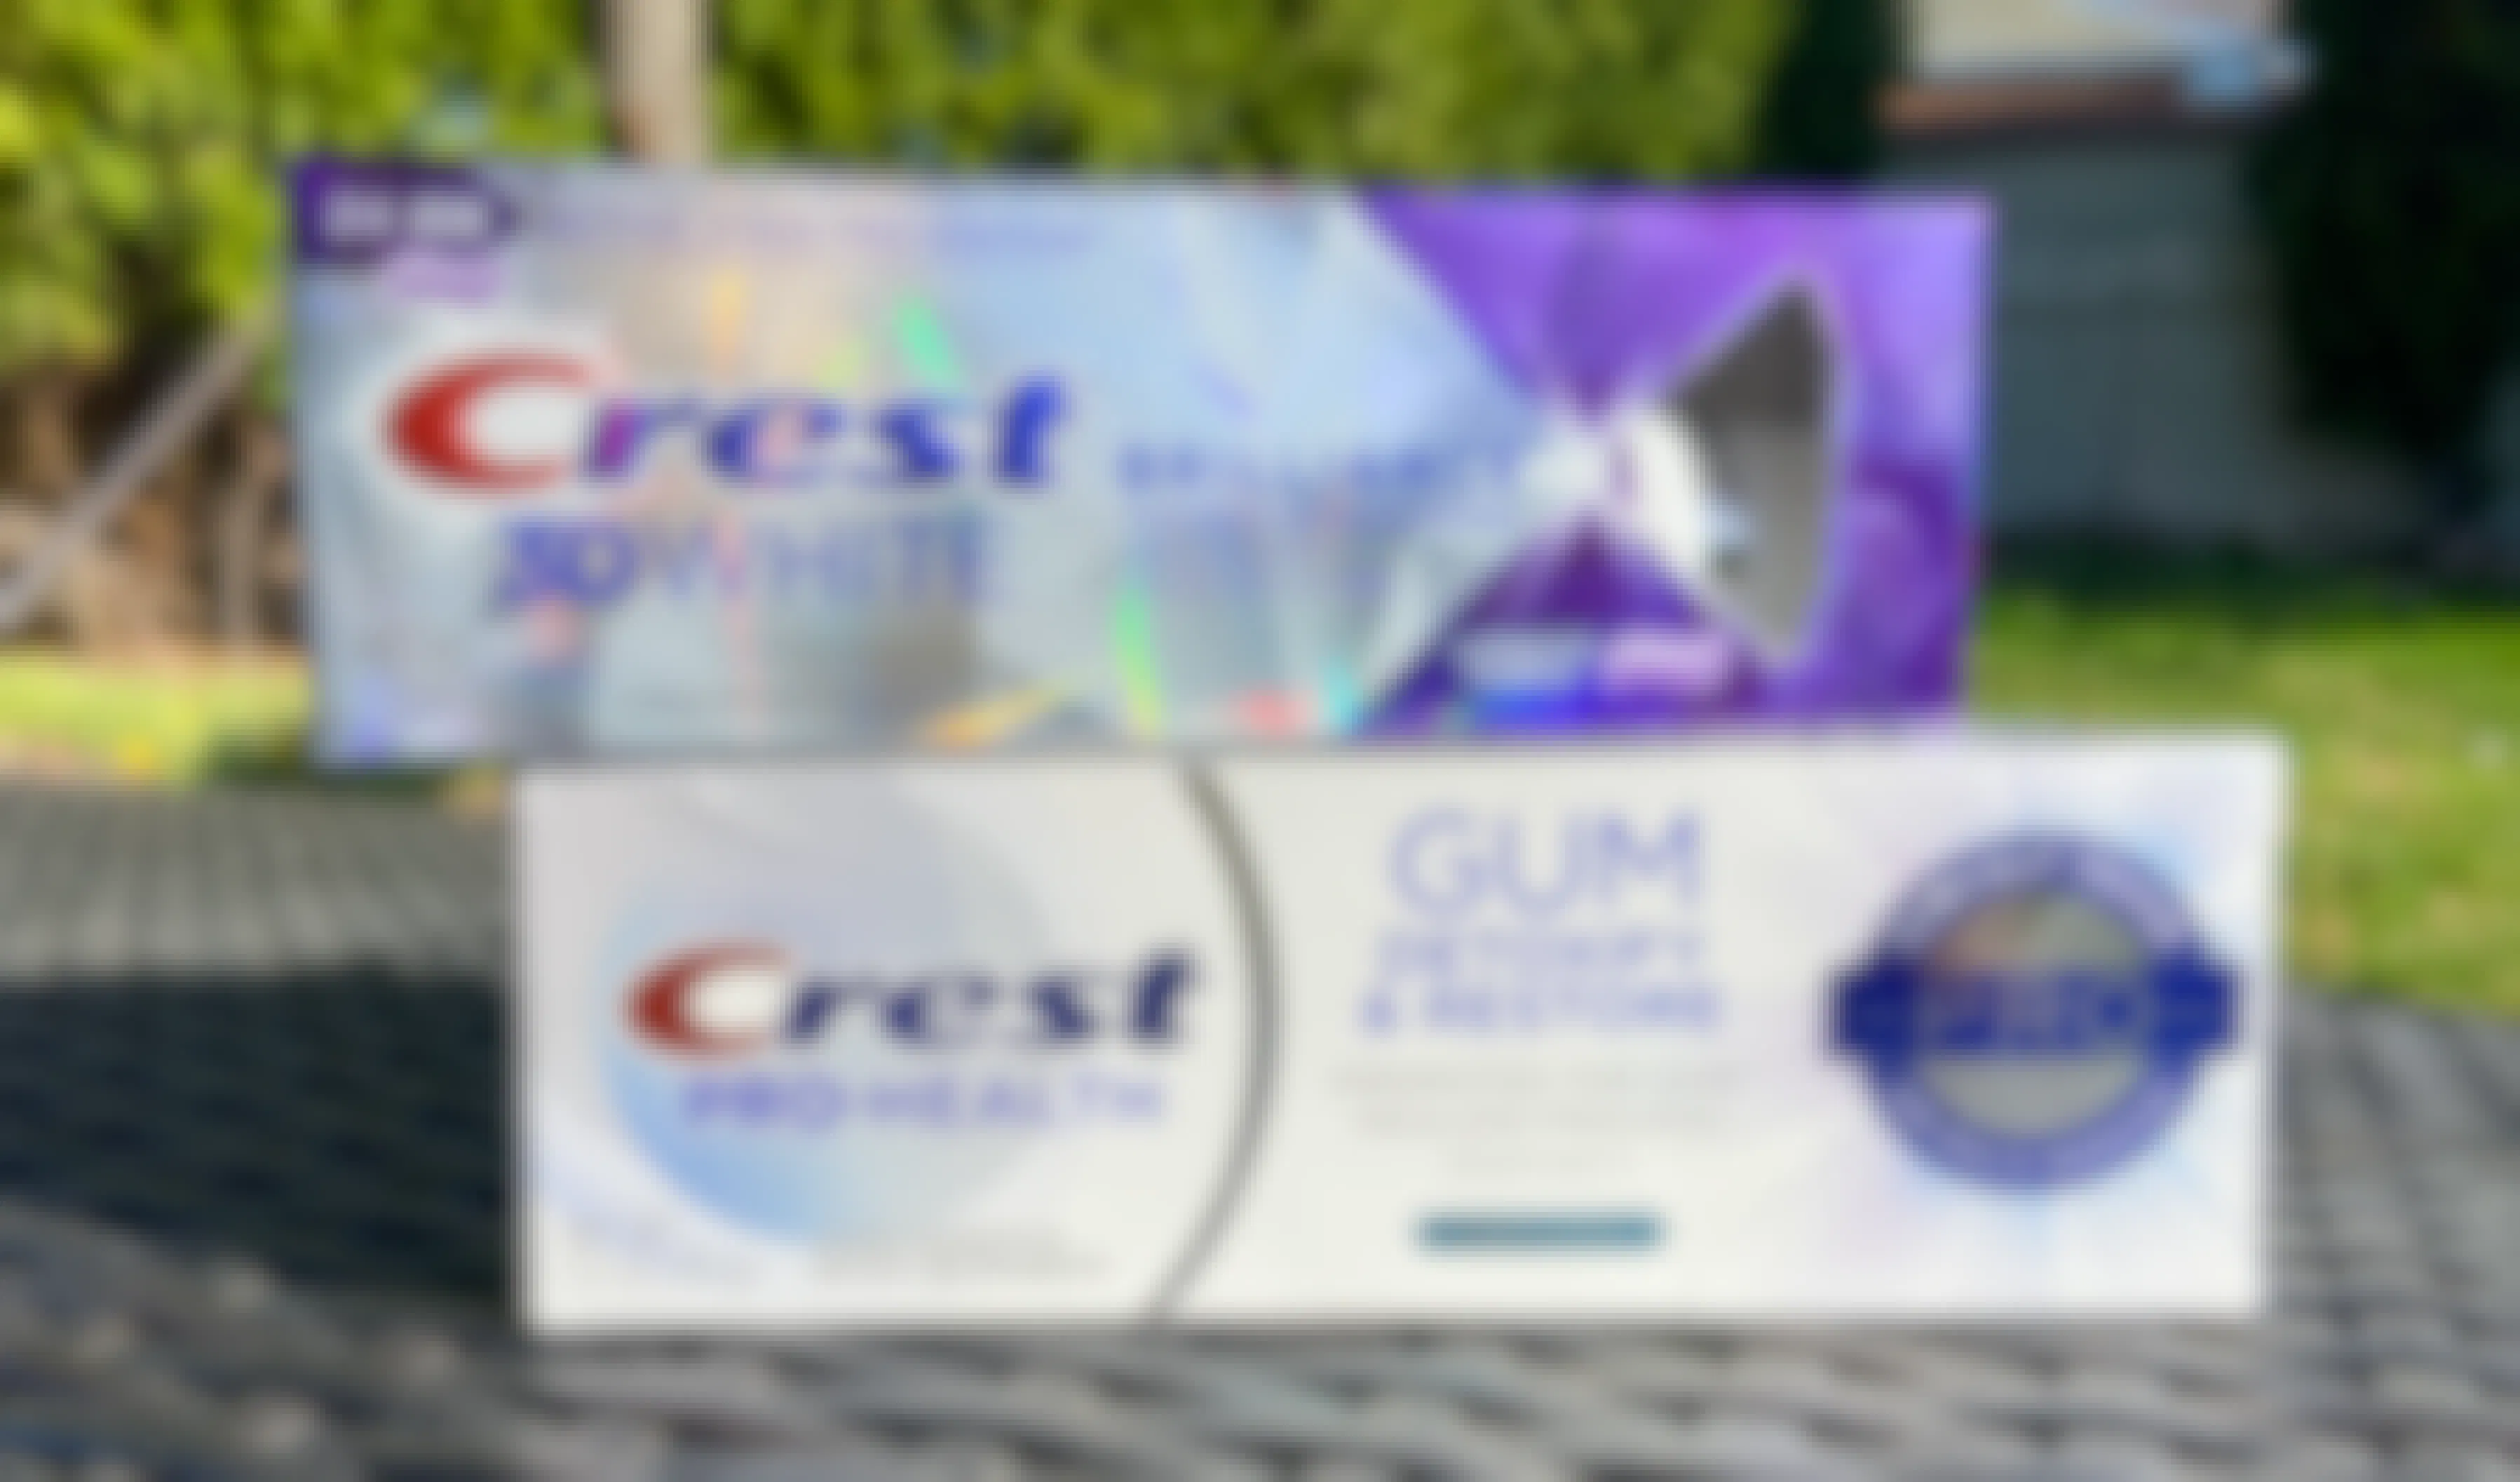 crest premium toothpaste on an outdoor table